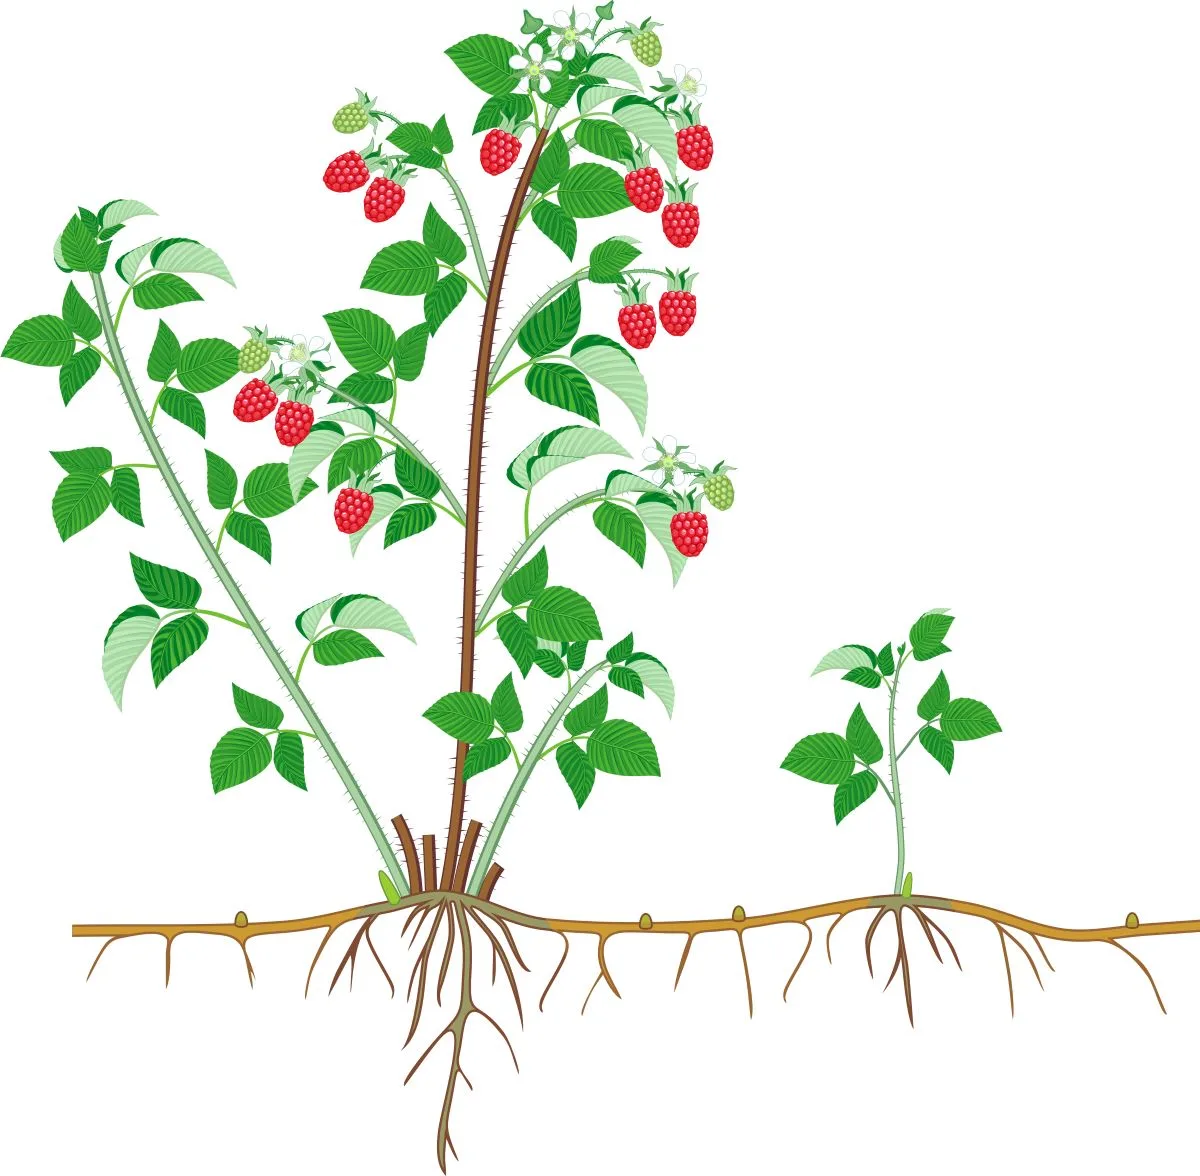 Graphic of a raspberry sucker growing off of the parent plant.